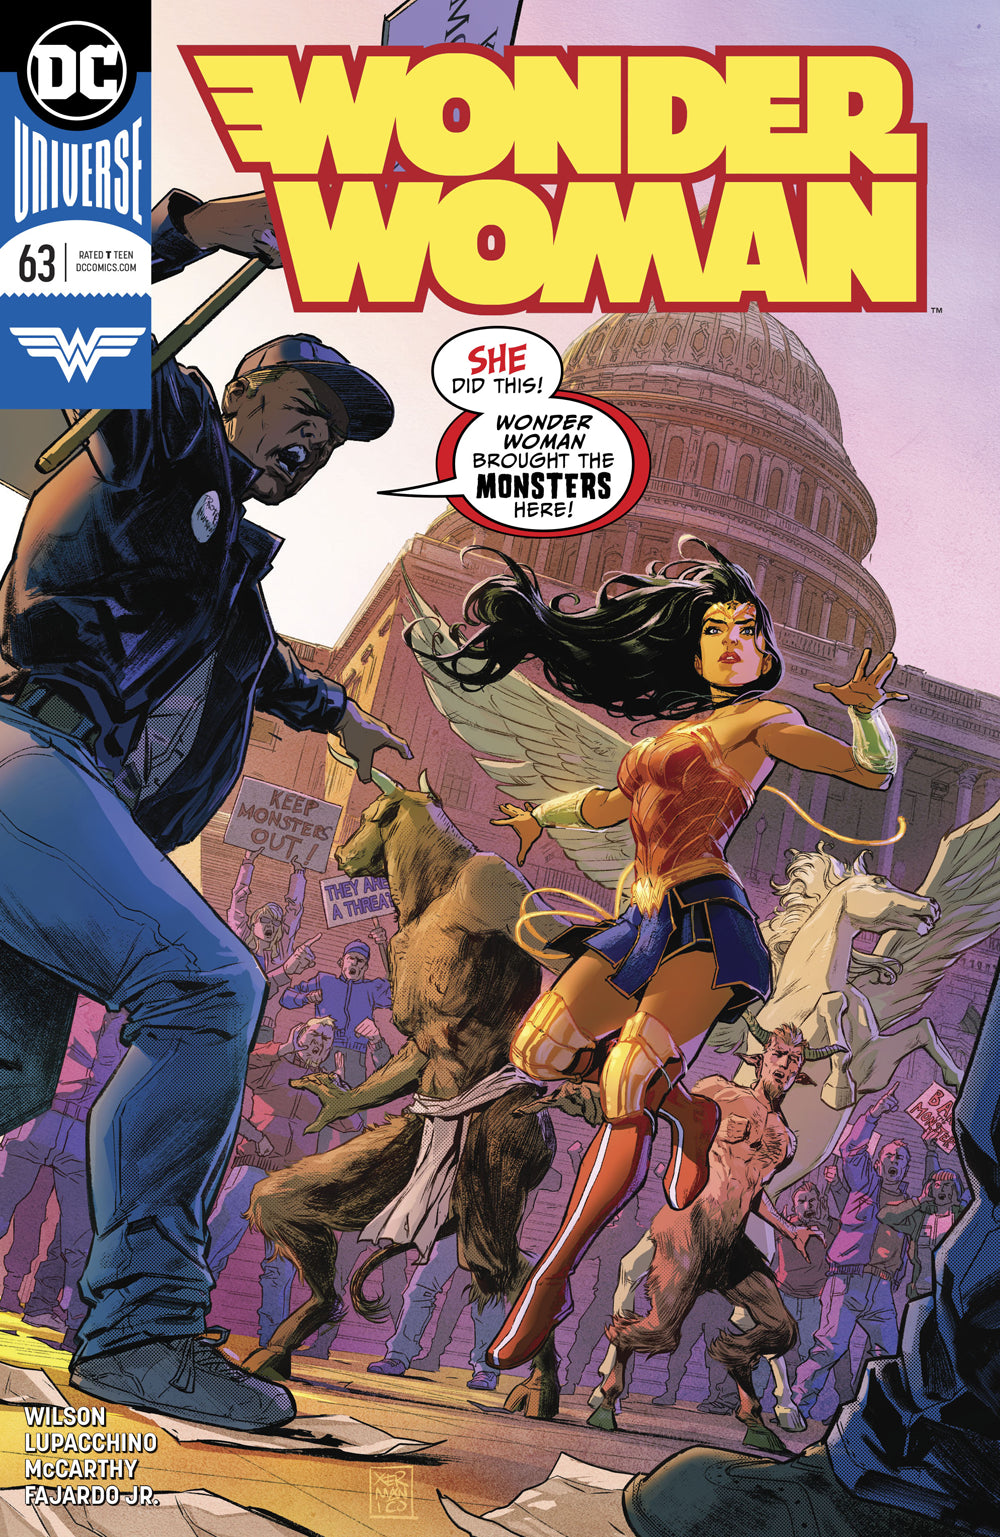 WONDER WOMAN #63 | Game Master's Emporium (The New GME)